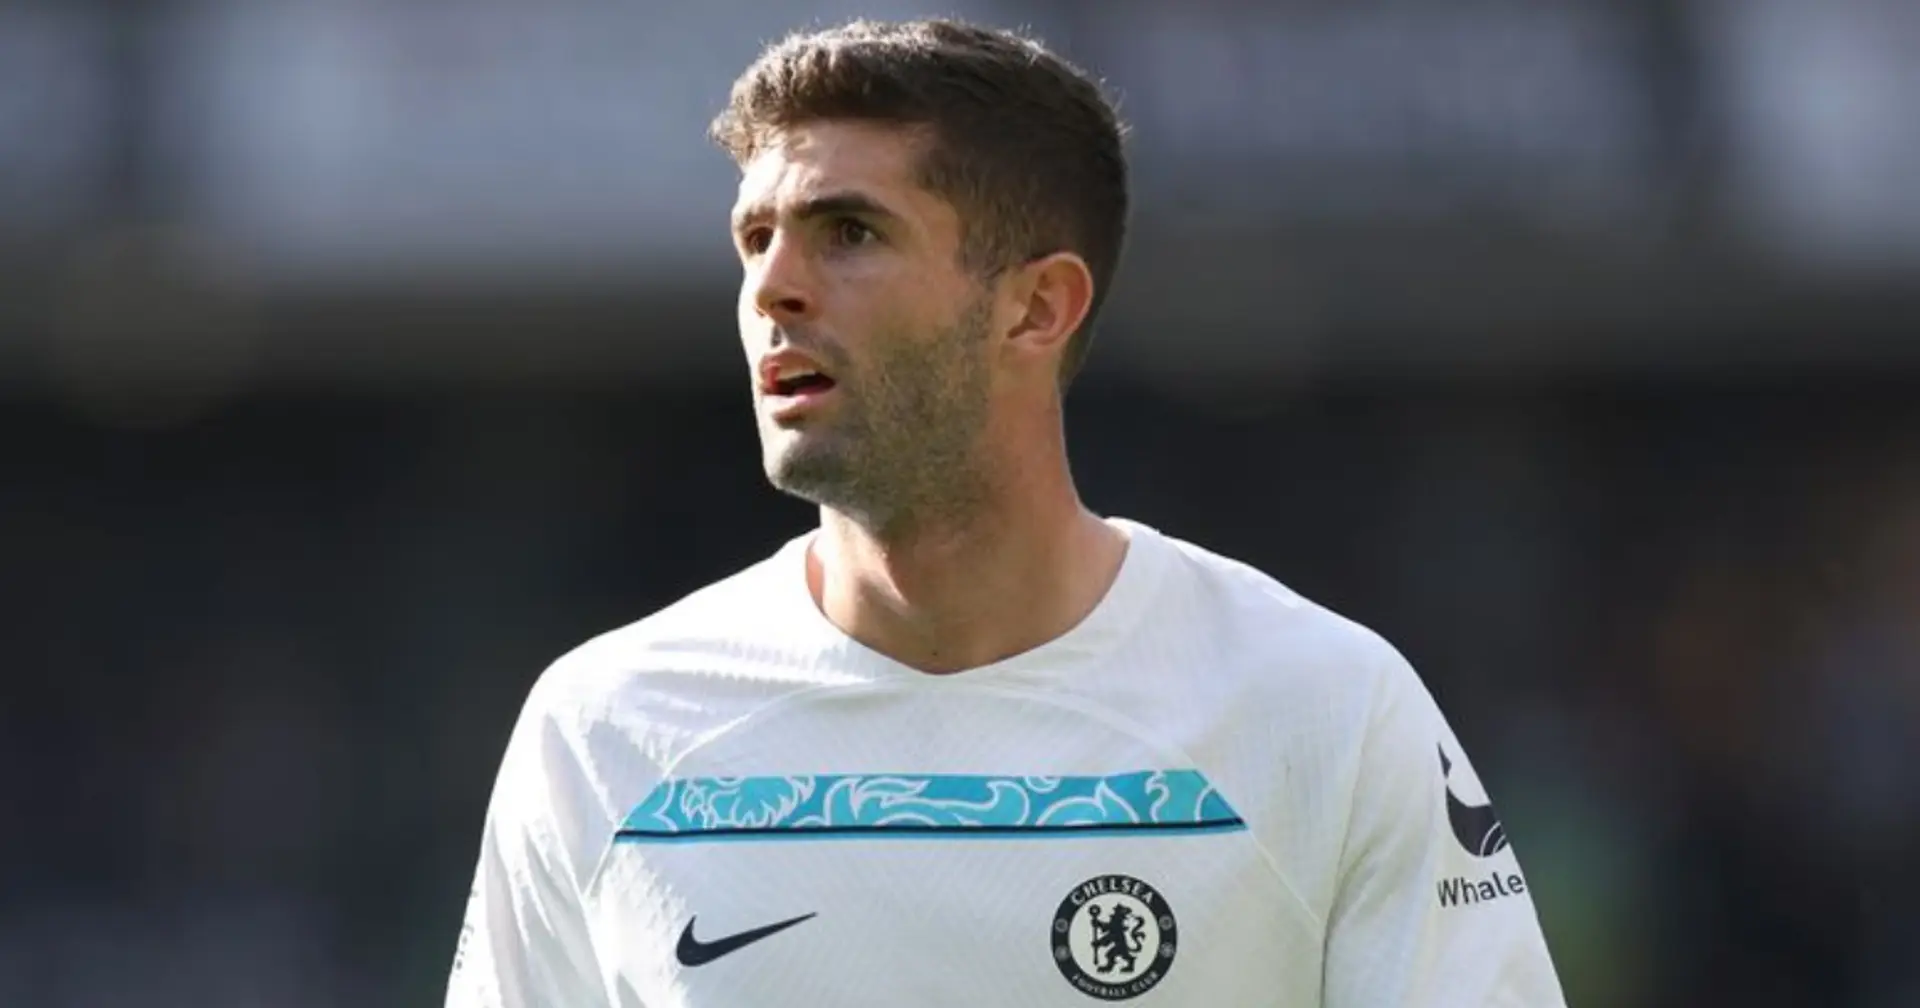 The Athletic: Christian Pulisic will leave Chelsea this summer (reliability: 5 stars)